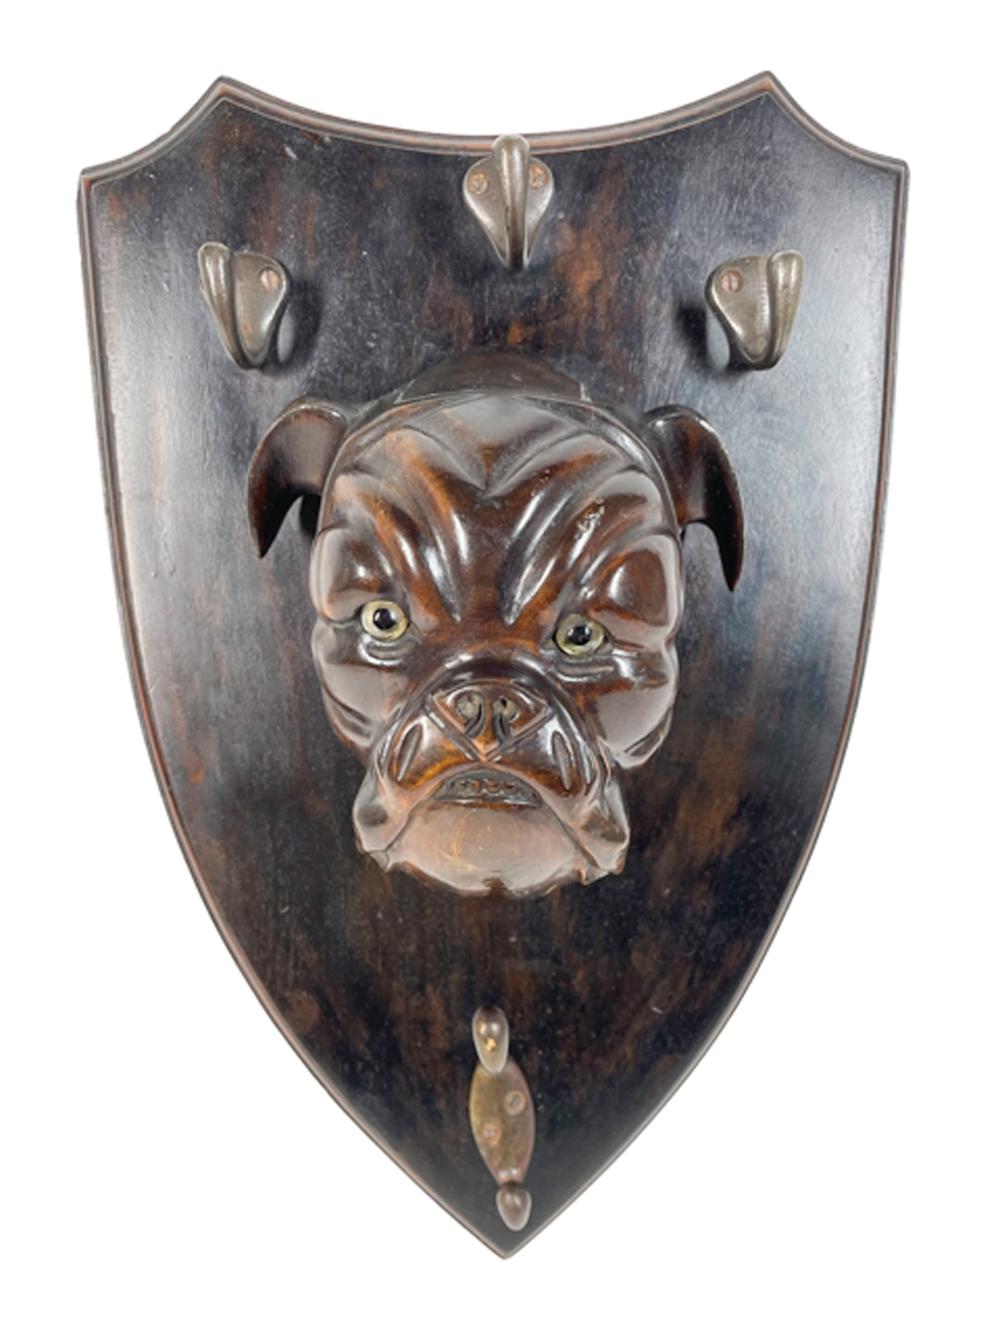 19th C Shield-Backed Lead/Leash Holder, Carved Wood Bulldog Head with Glass Eyes In Good Condition For Sale In Chapel Hill, NC